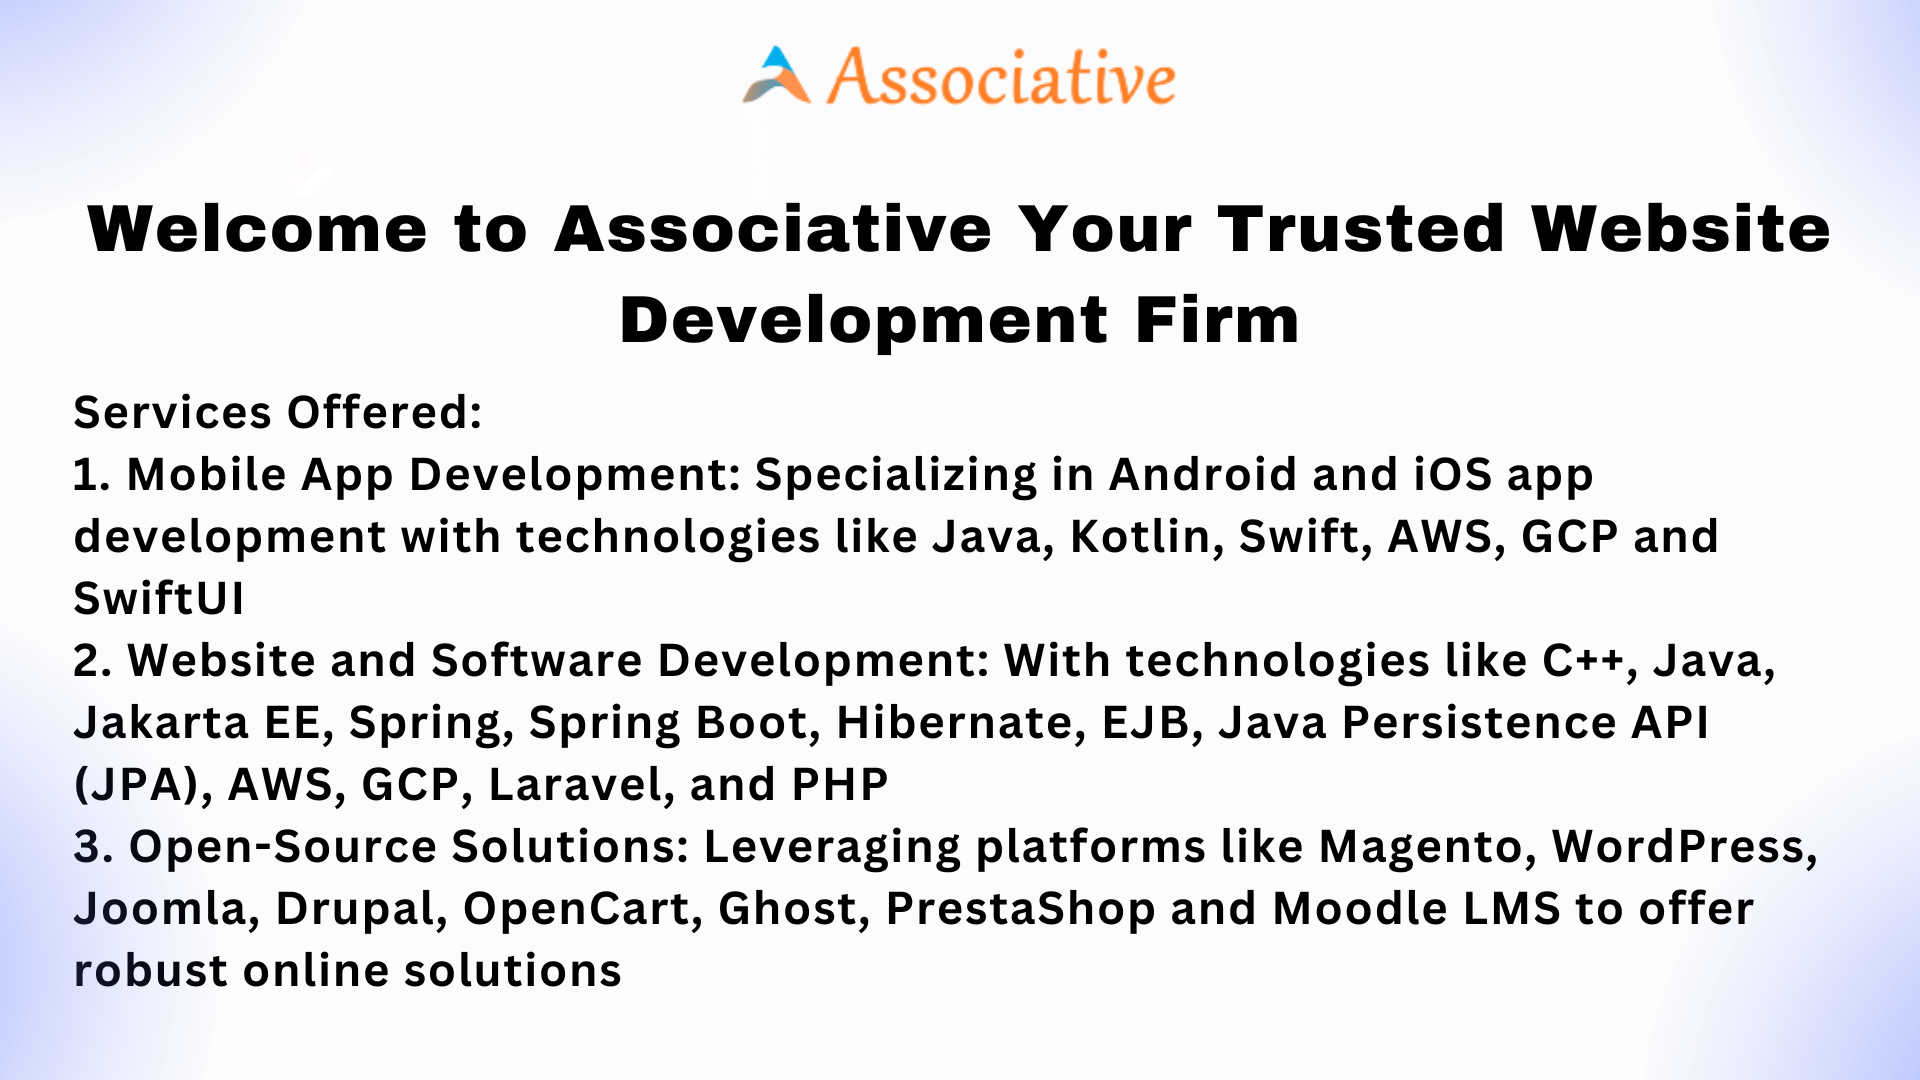 Welcome to Associative Your Trusted Website Development Firm